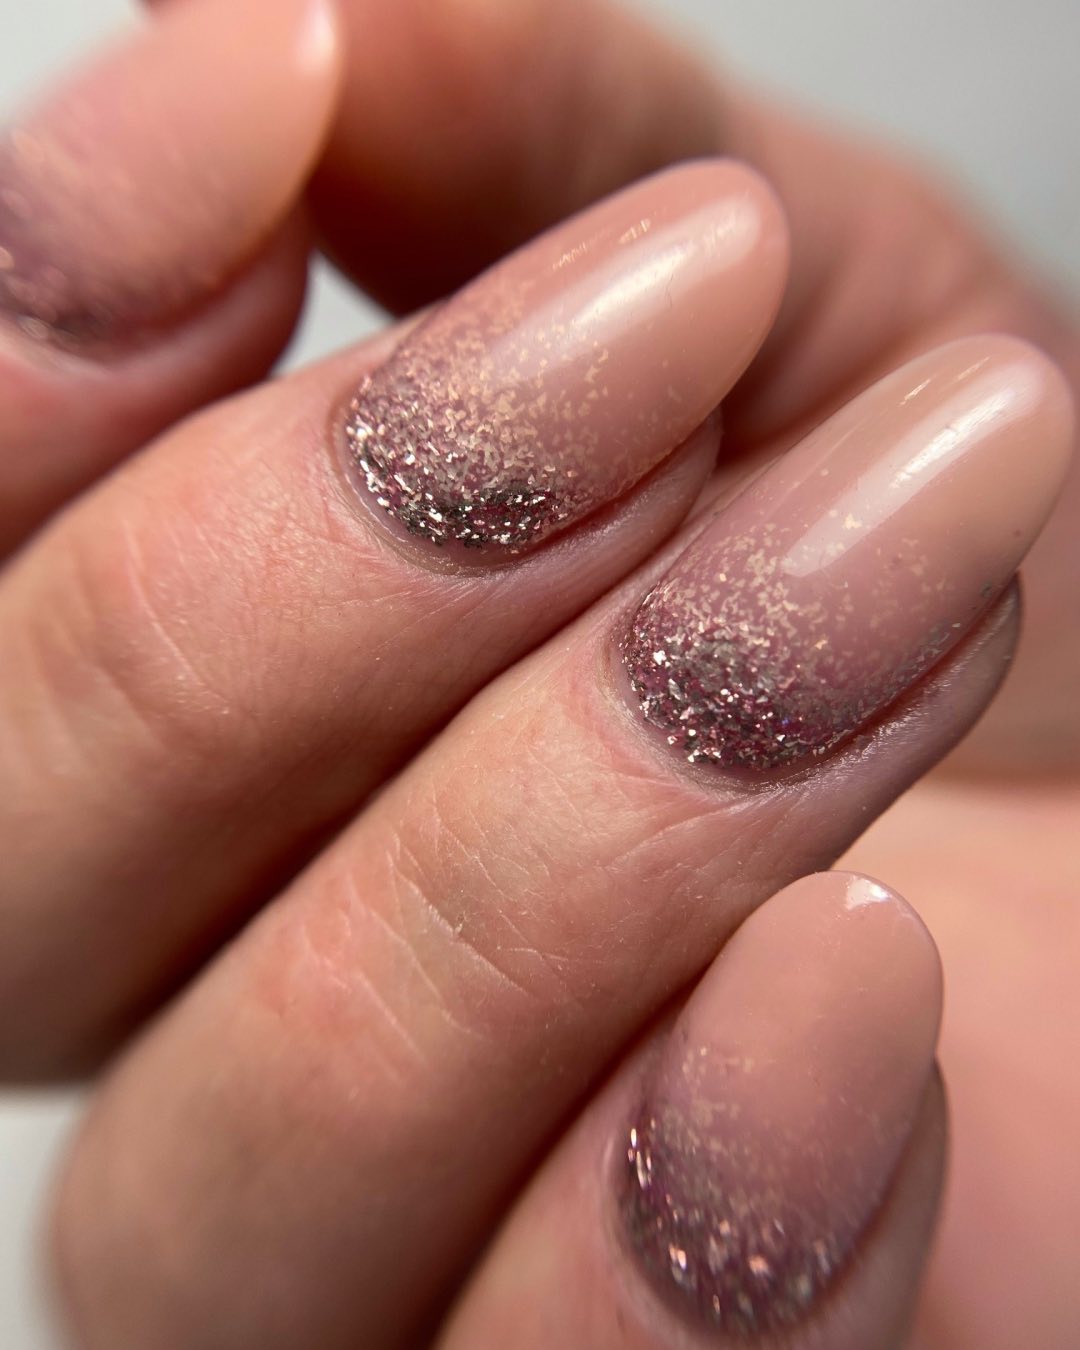 Bradford Nails - Lovely nude and rose gold glitter ombré, simply pretty  nails 😊 #ombrenails #nudenails #naildesign #trust_bradfordnails 😘😘😘  BRADFORD NAILS SALON ❤️ 💎 Review as Top 3 Nail Salons by Three